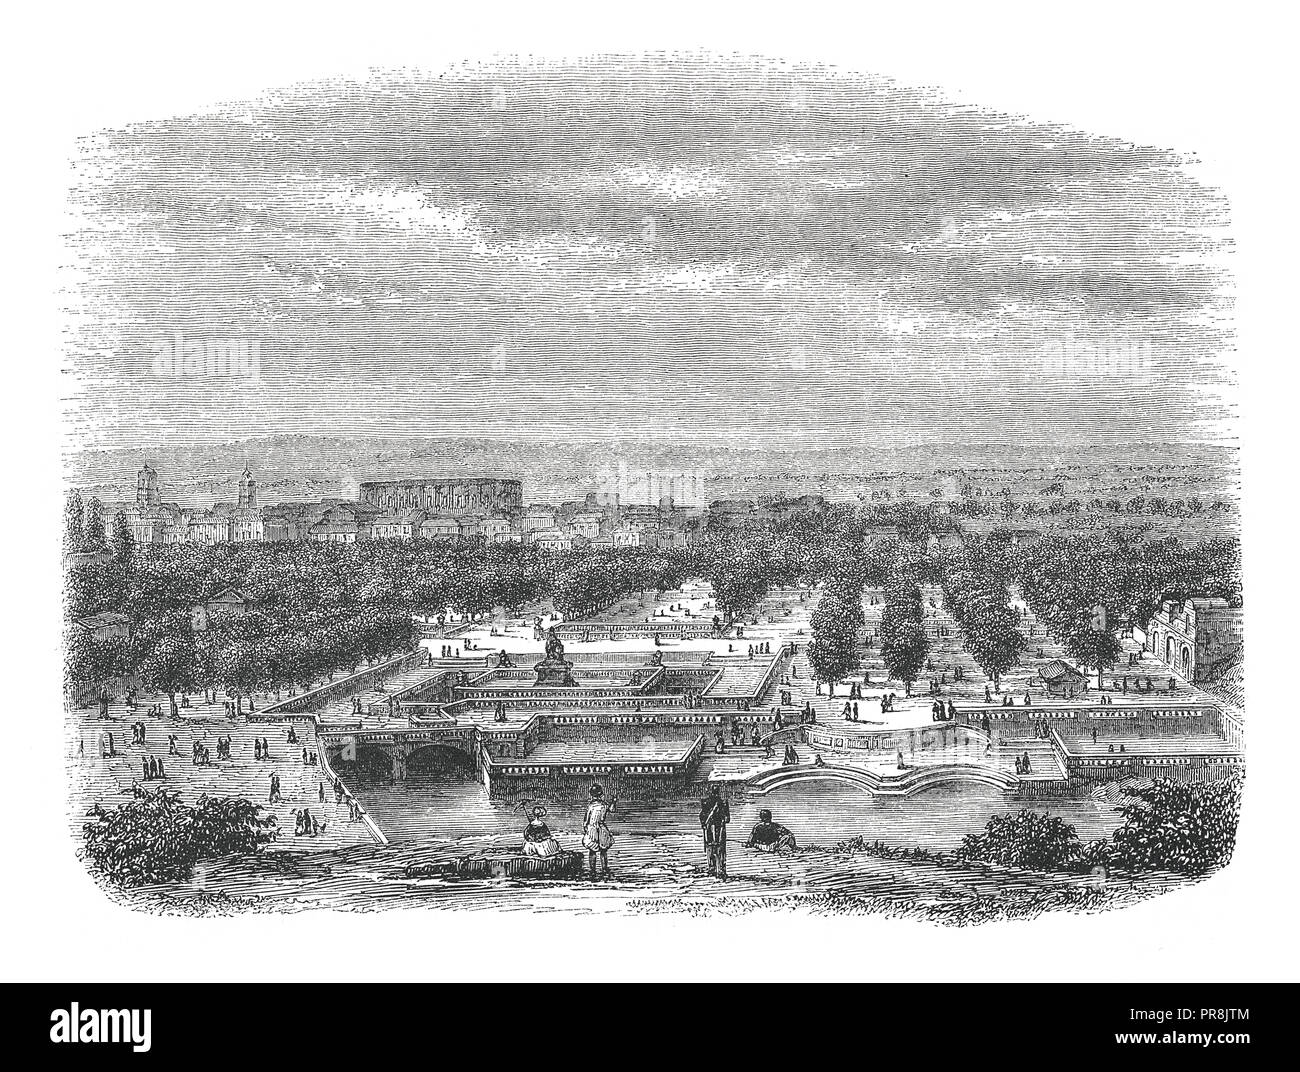 19th century illustration of view of Nimes city, from the Garden and the Baths of August (antique engraving). Original artwork published in Le magasin Stock Photo